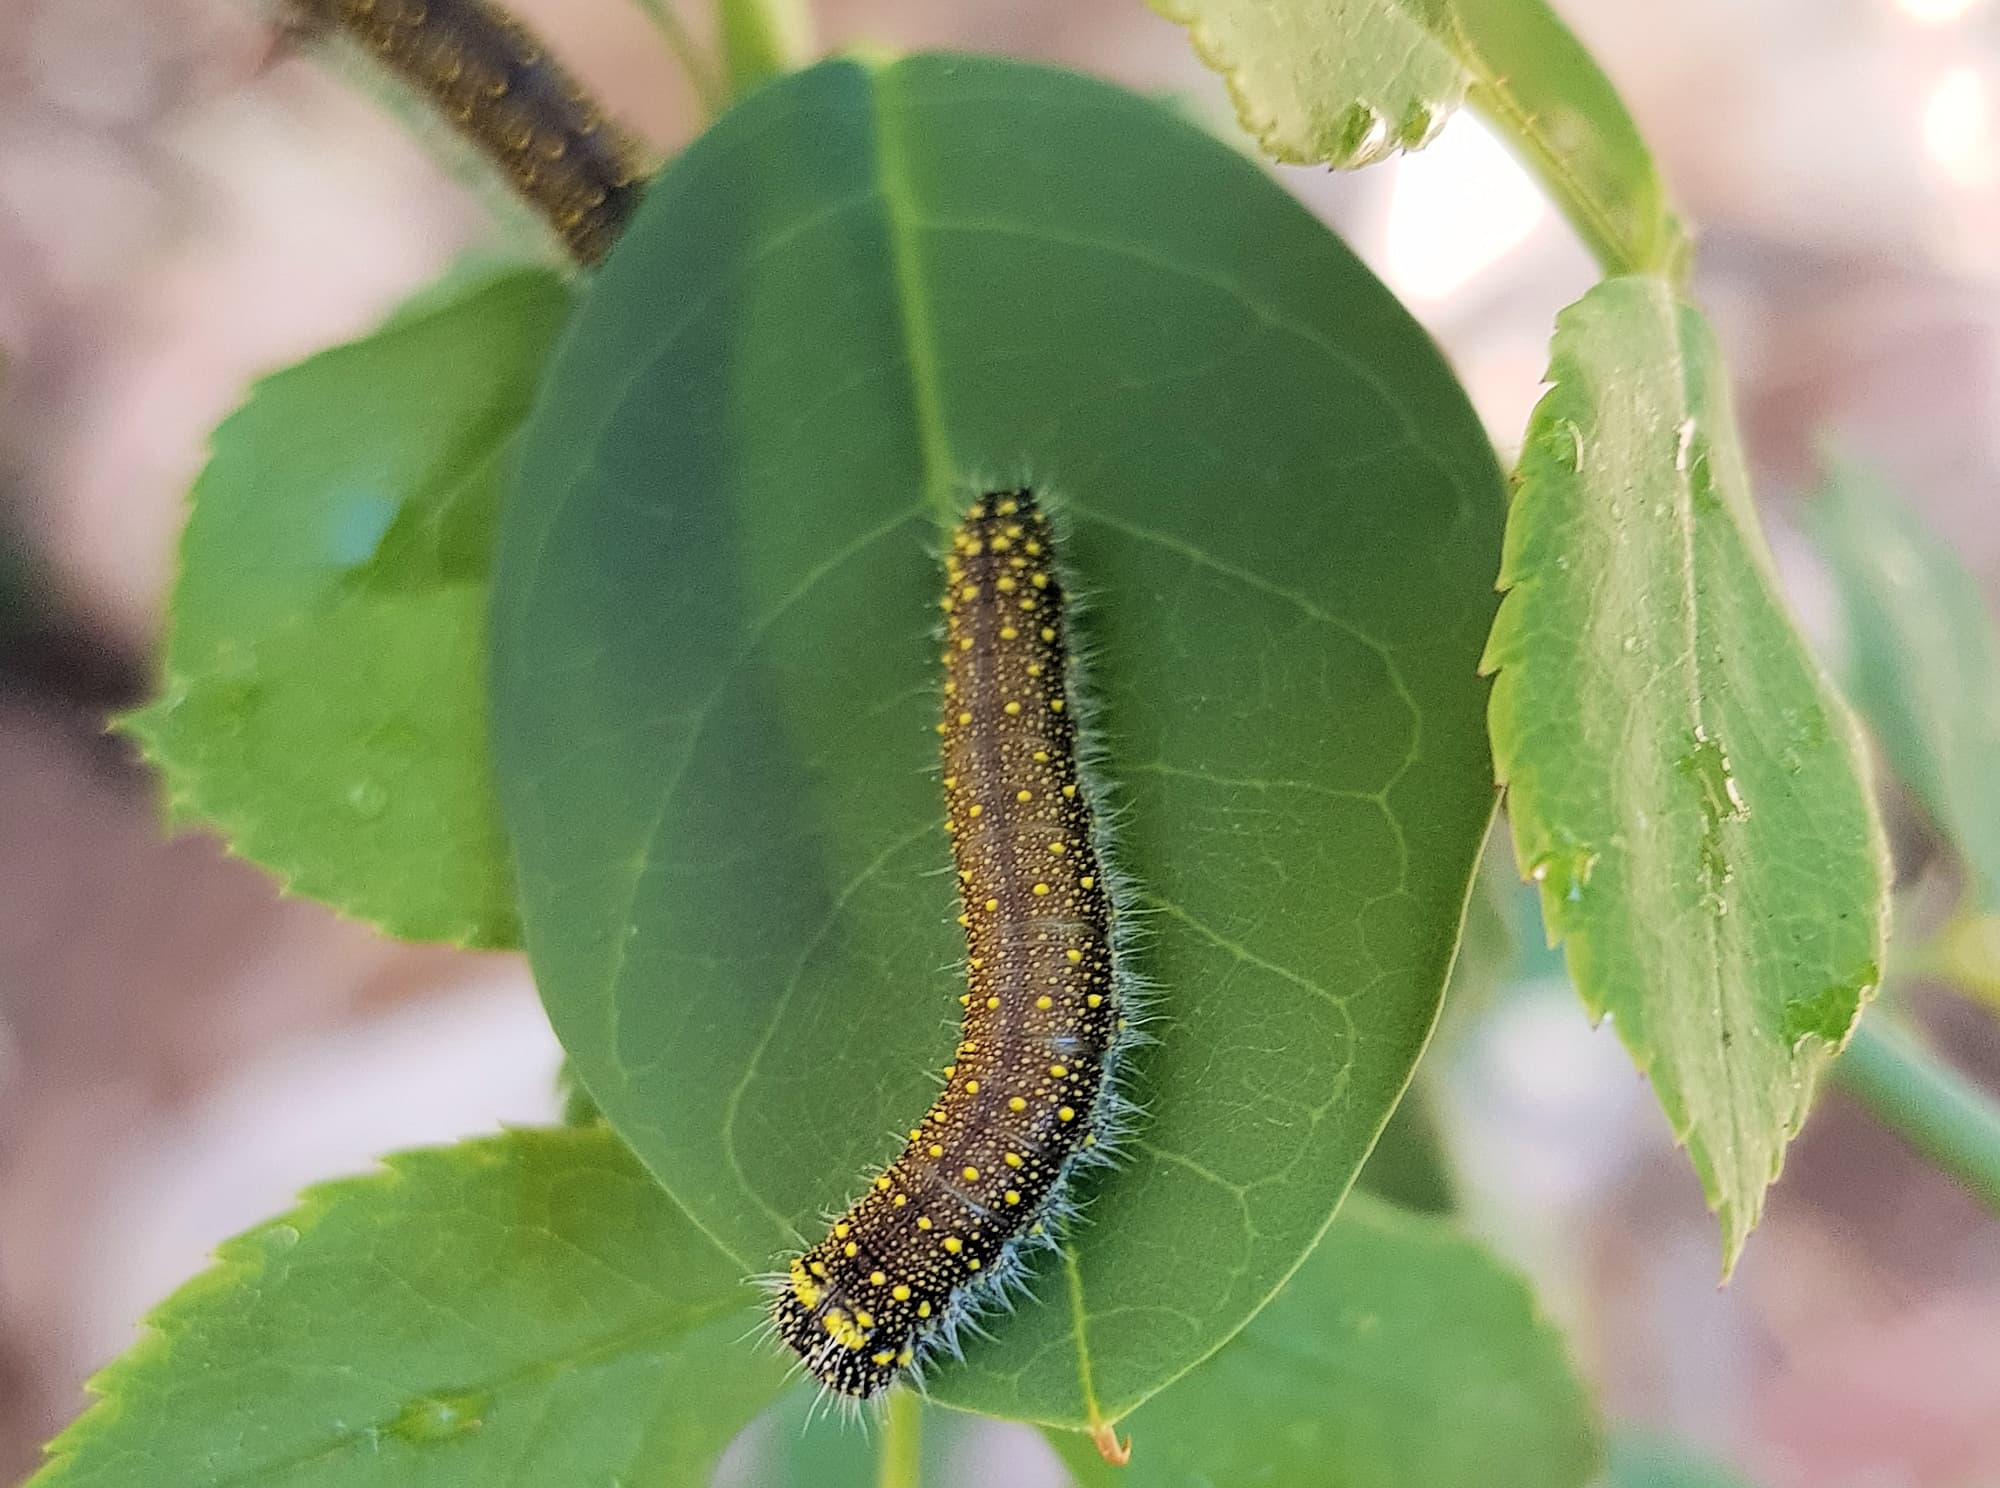 Instar stage of the caterpillar of the Caper White Butterfly (Belenois java teutonia), Alice Springs, NT